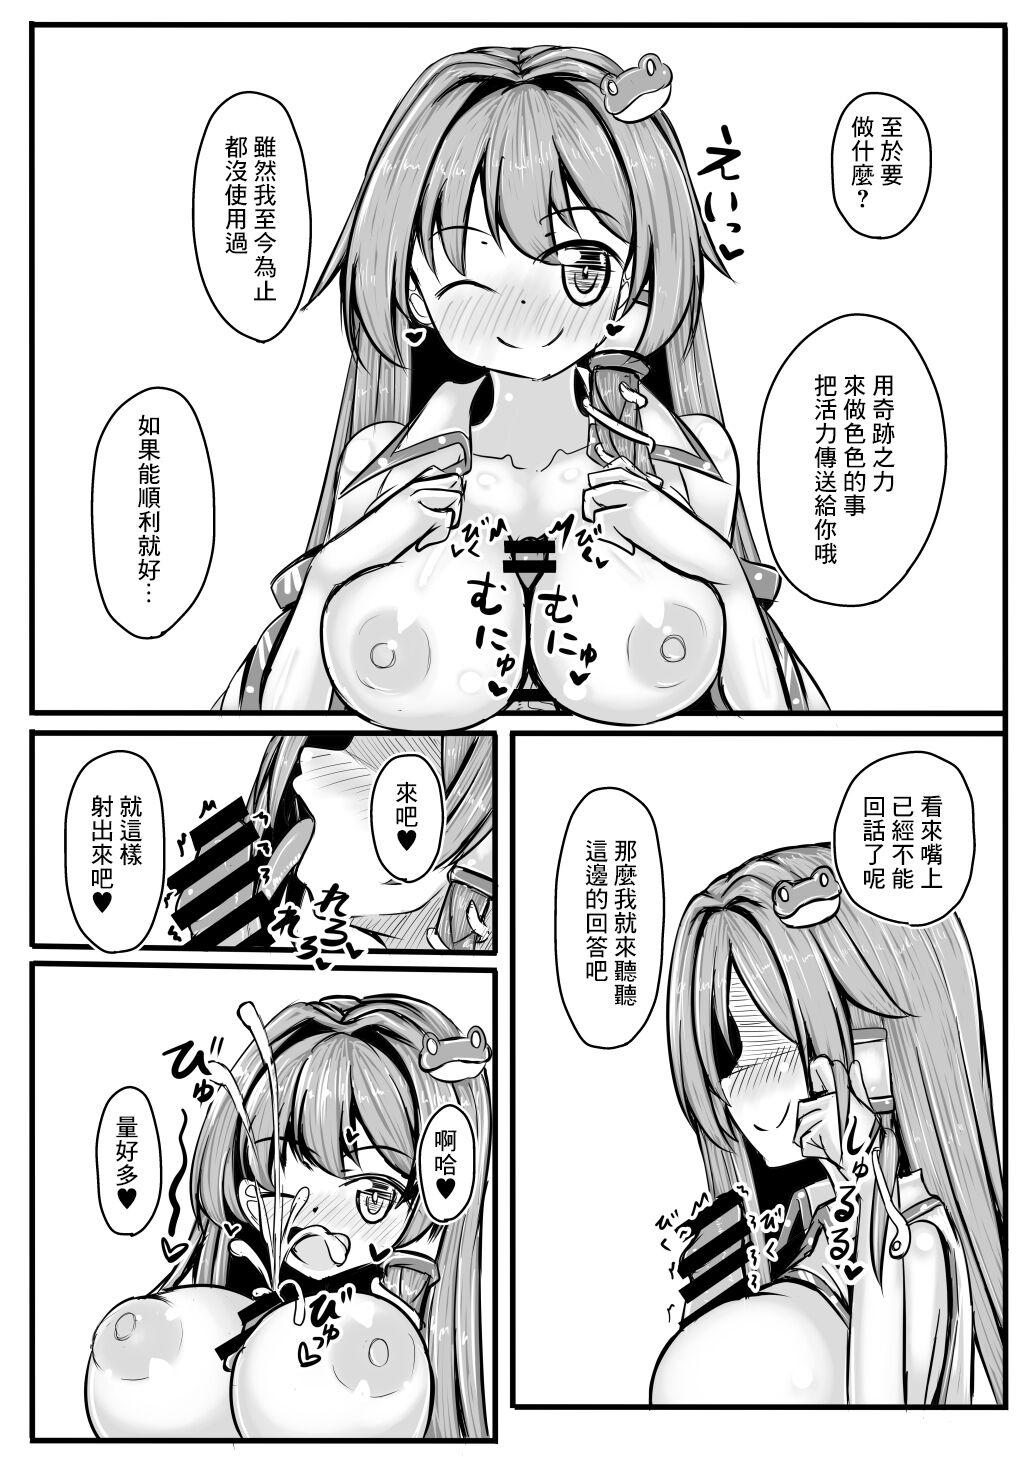 Naked 早苗さんと元気になるえっちするコピ本 - Touhou project Pussylick - Page 2